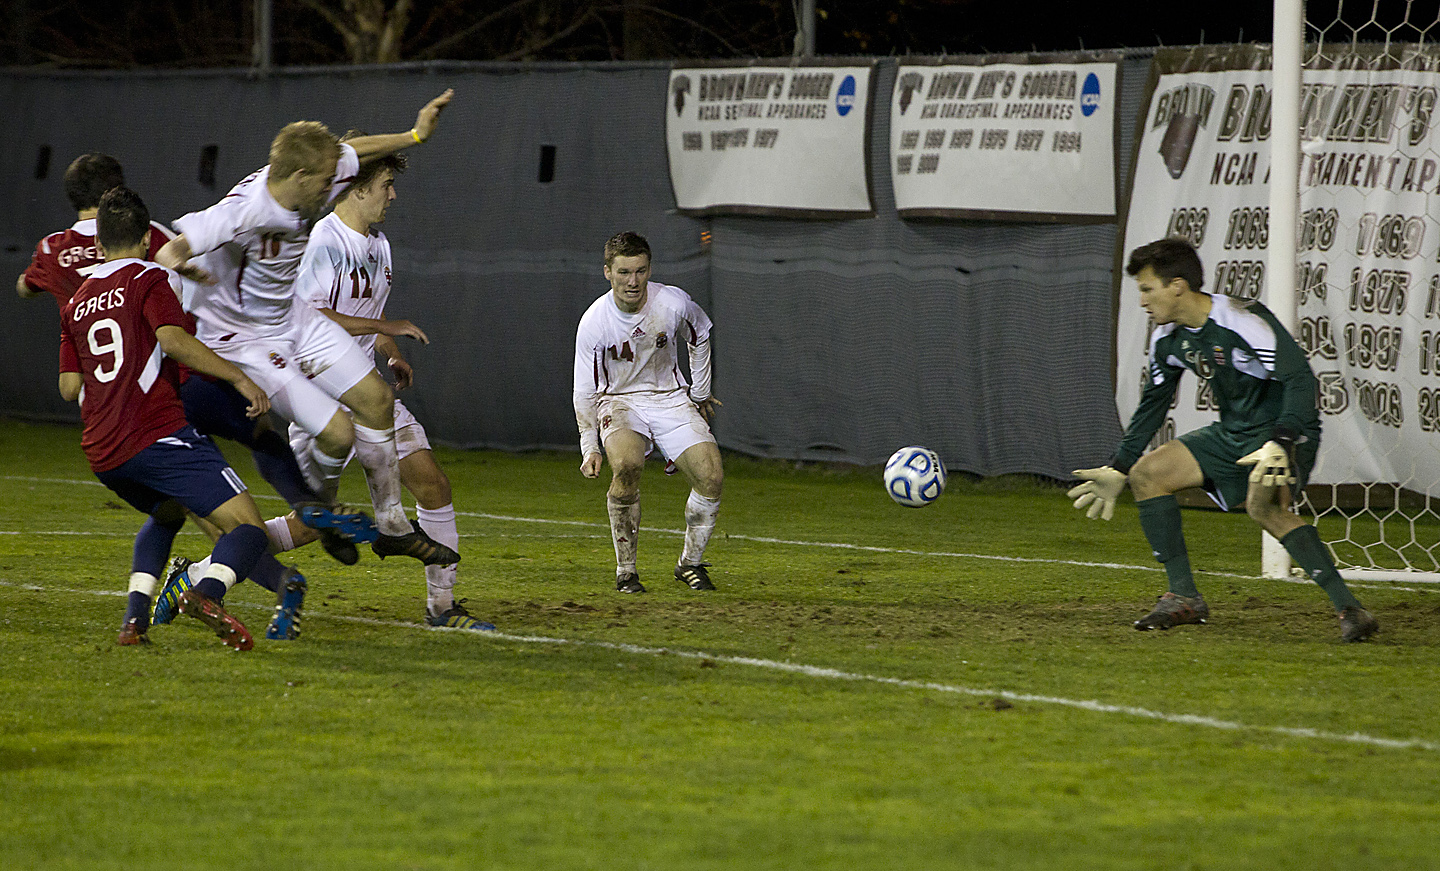 But it was not to be: The ball finds the net; Brown can't stop the game-winning goal at 97:05.